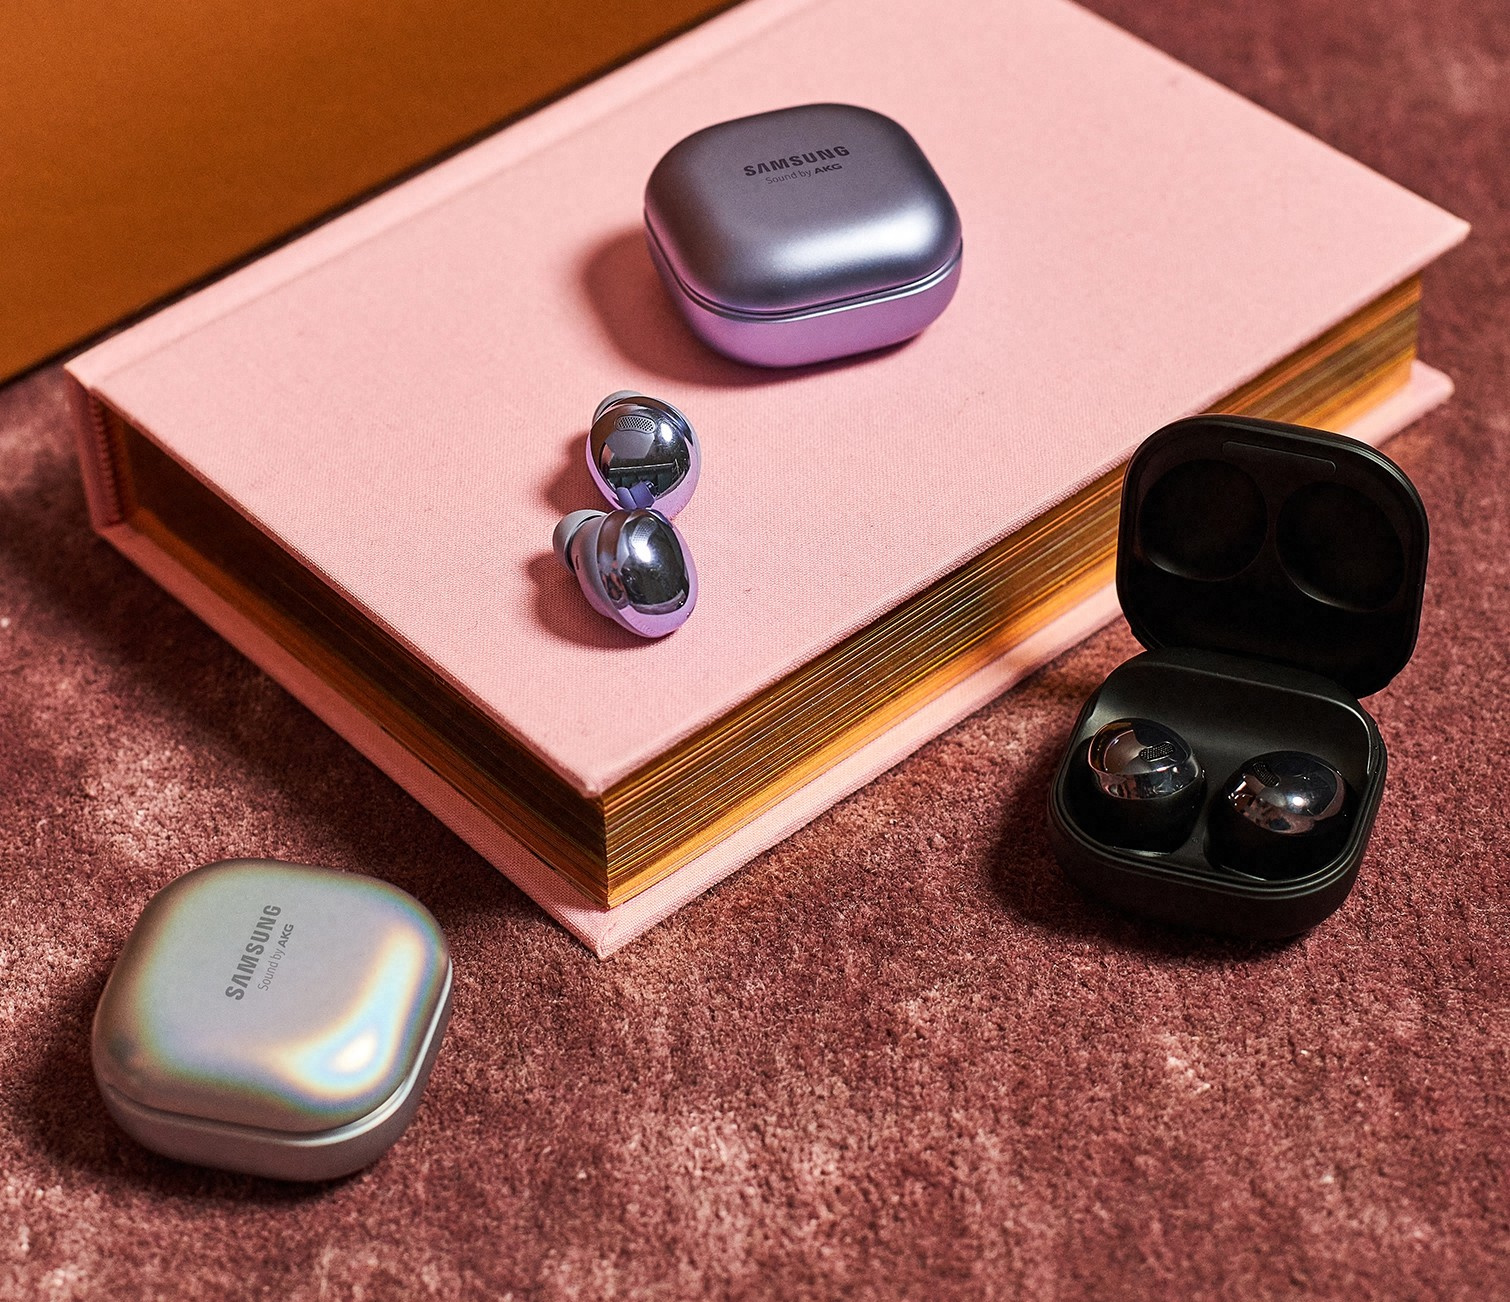 Higher than expected US pricing leaks for Samsung Galaxy Buds2 Pro ahead of  Galaxy Unpacked event -  News